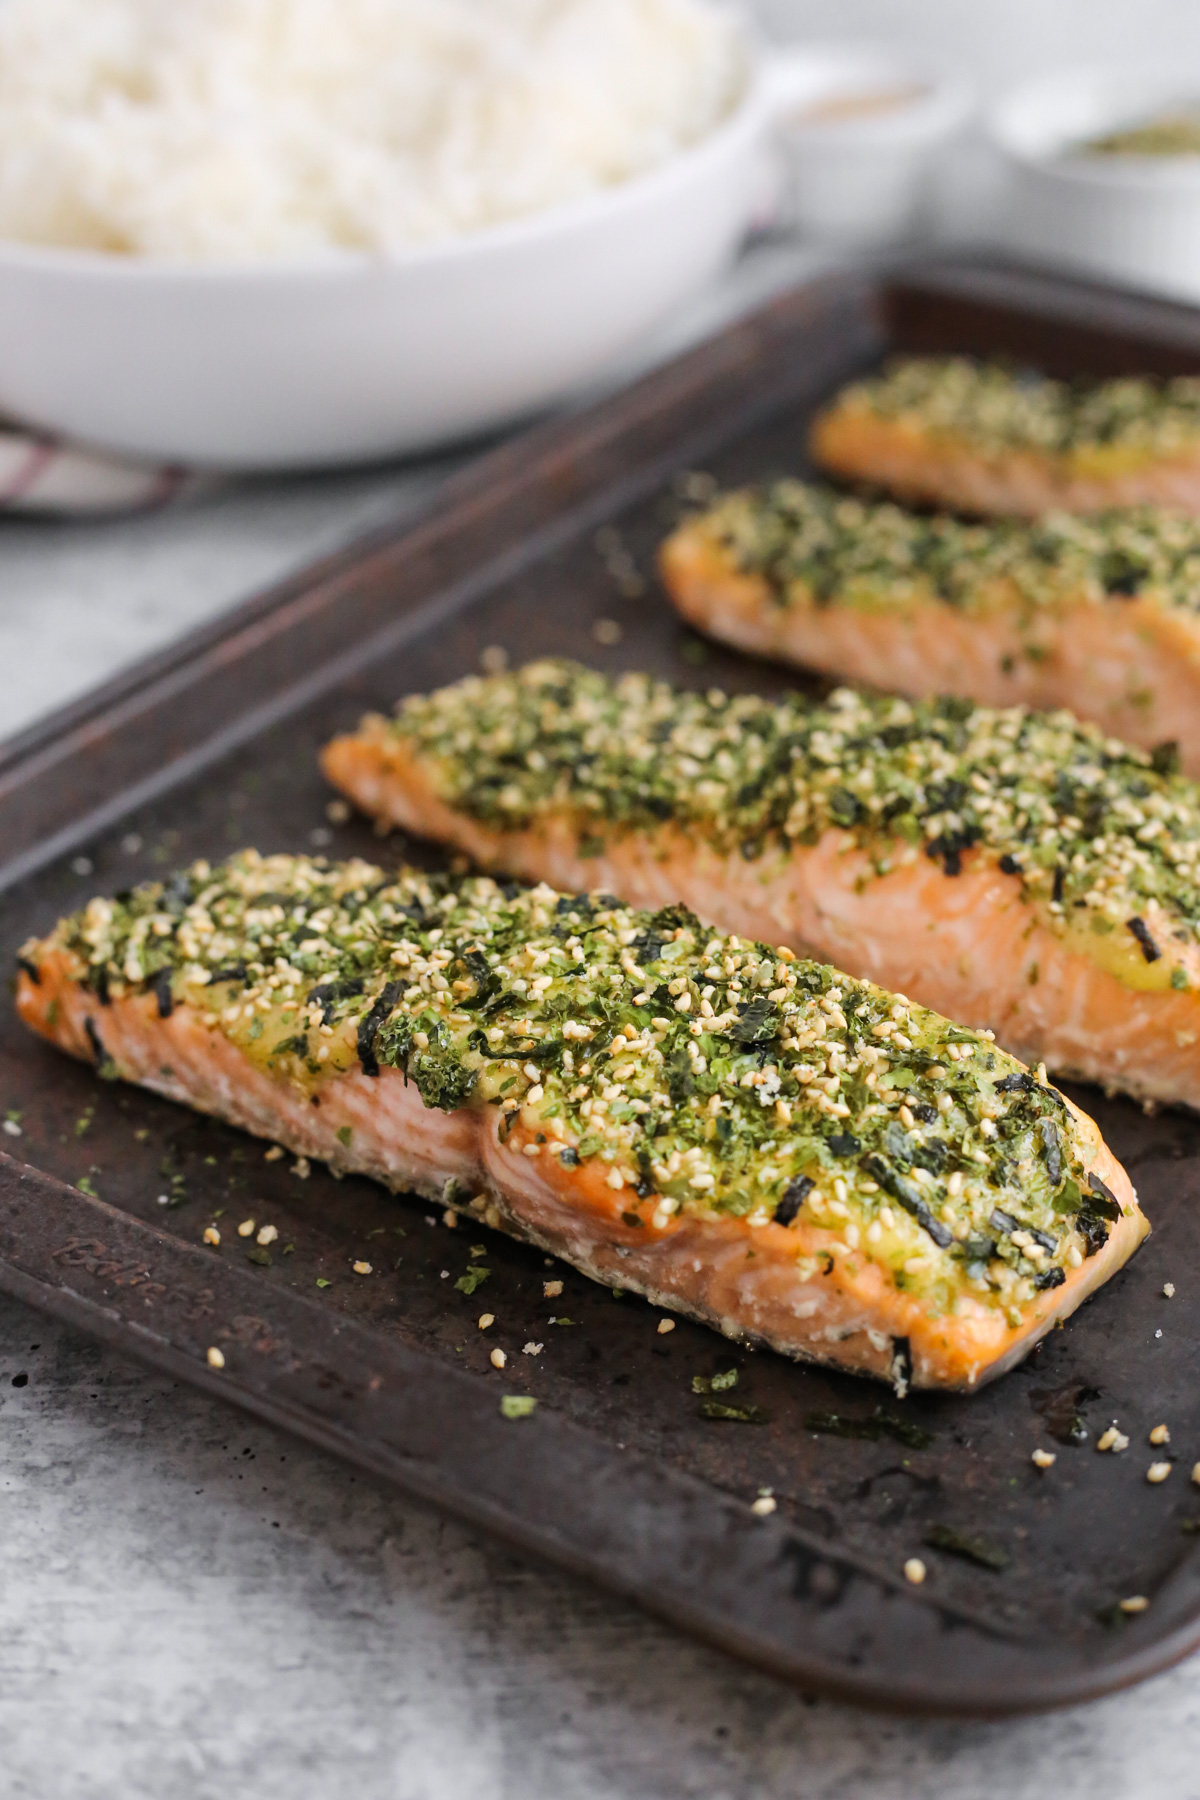 A sheet pan with patina displays four cooked pieces of Furikake salmon on a kitchen countertop, with a bowl of steamed white rice cooked and ready to serve in the background